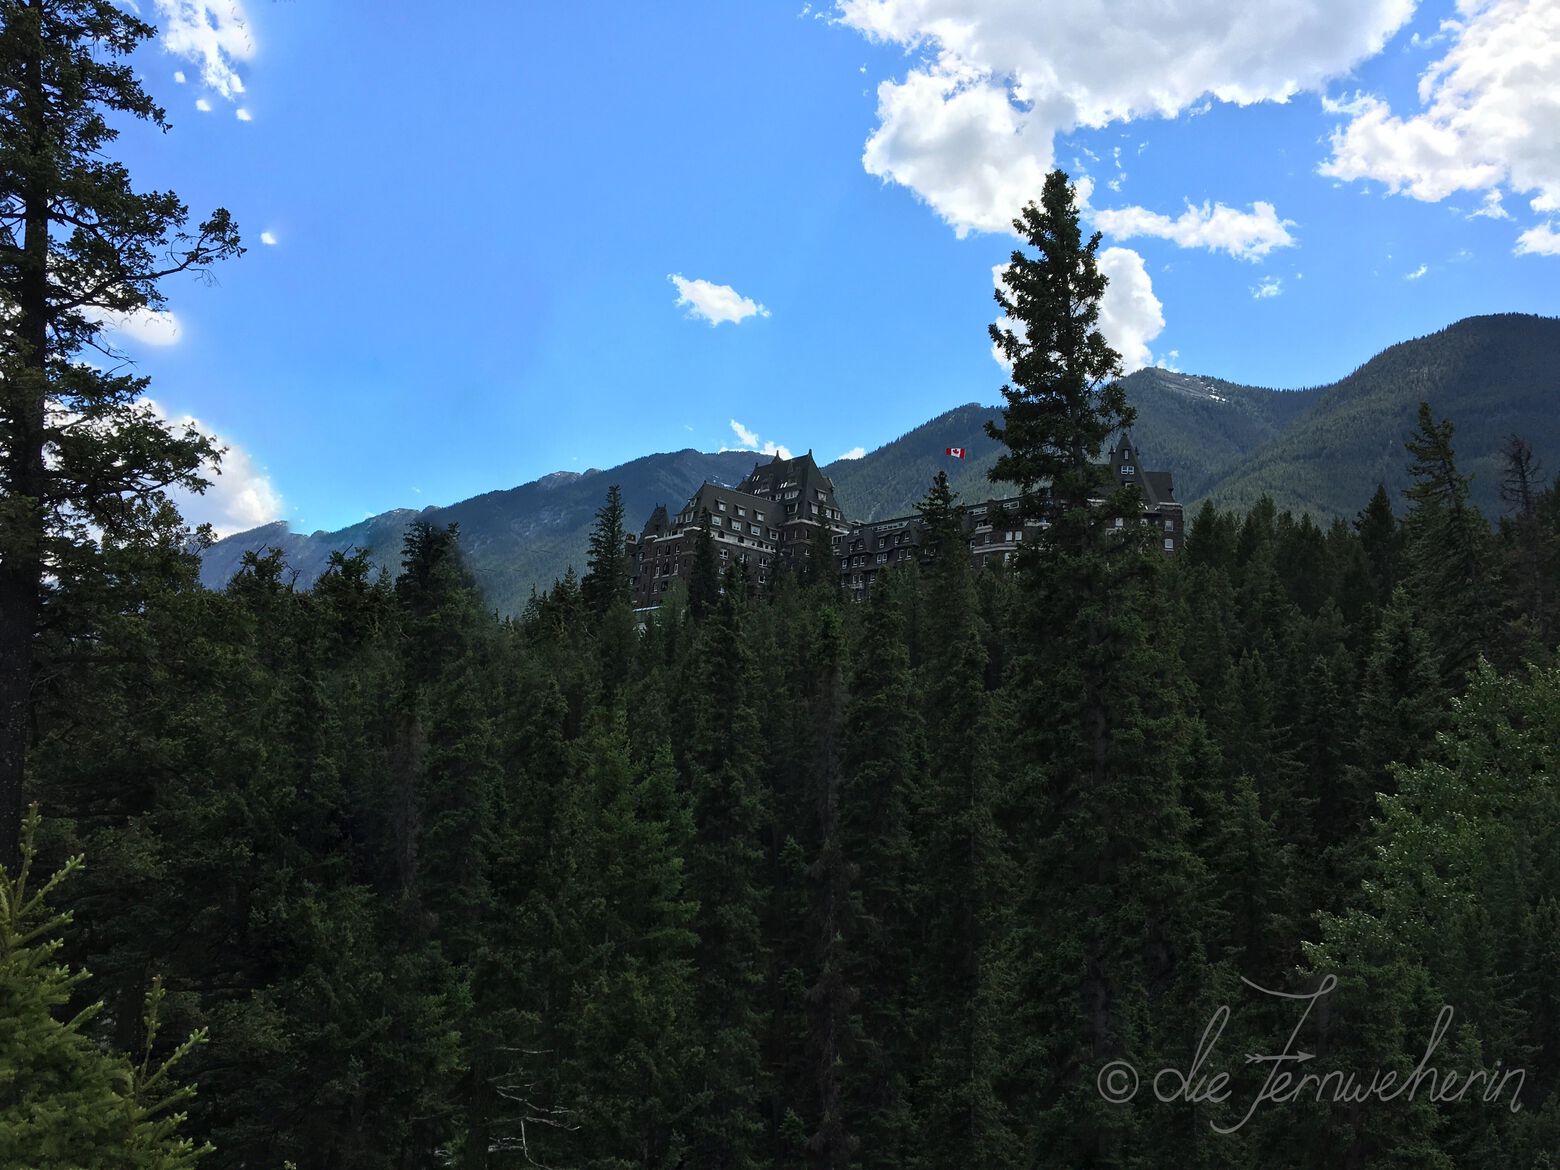 The Banff Springs Hotel as seen from the Bow Falls Trail, surrounded by conifers with Sulphur Mountain in the background.